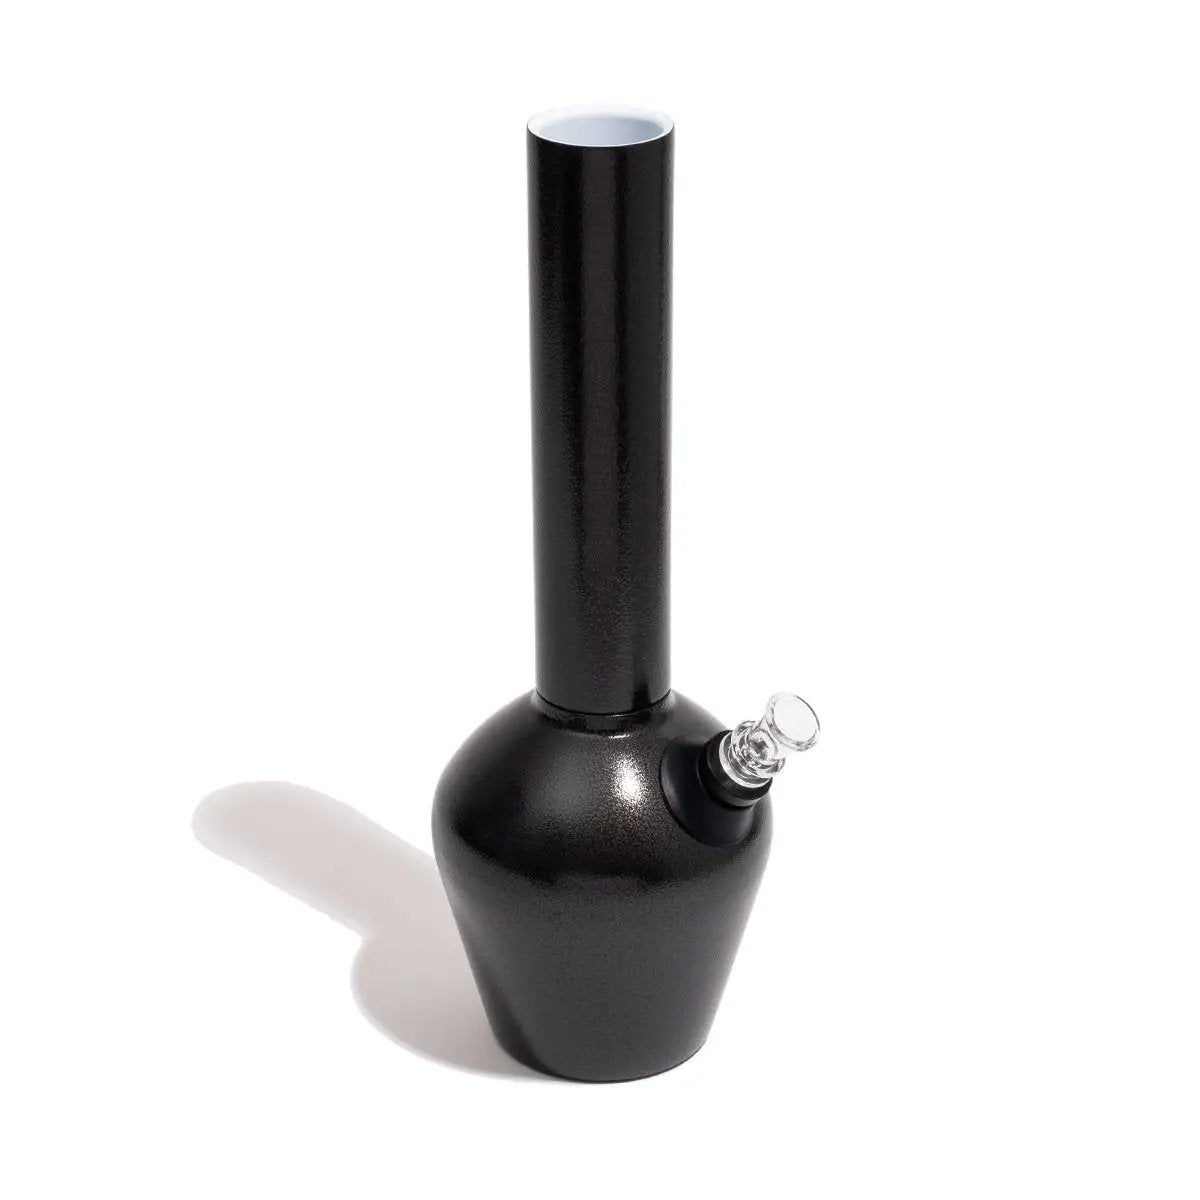 Chill - Limited Edition - Black Armored by Chill Steel Pipes